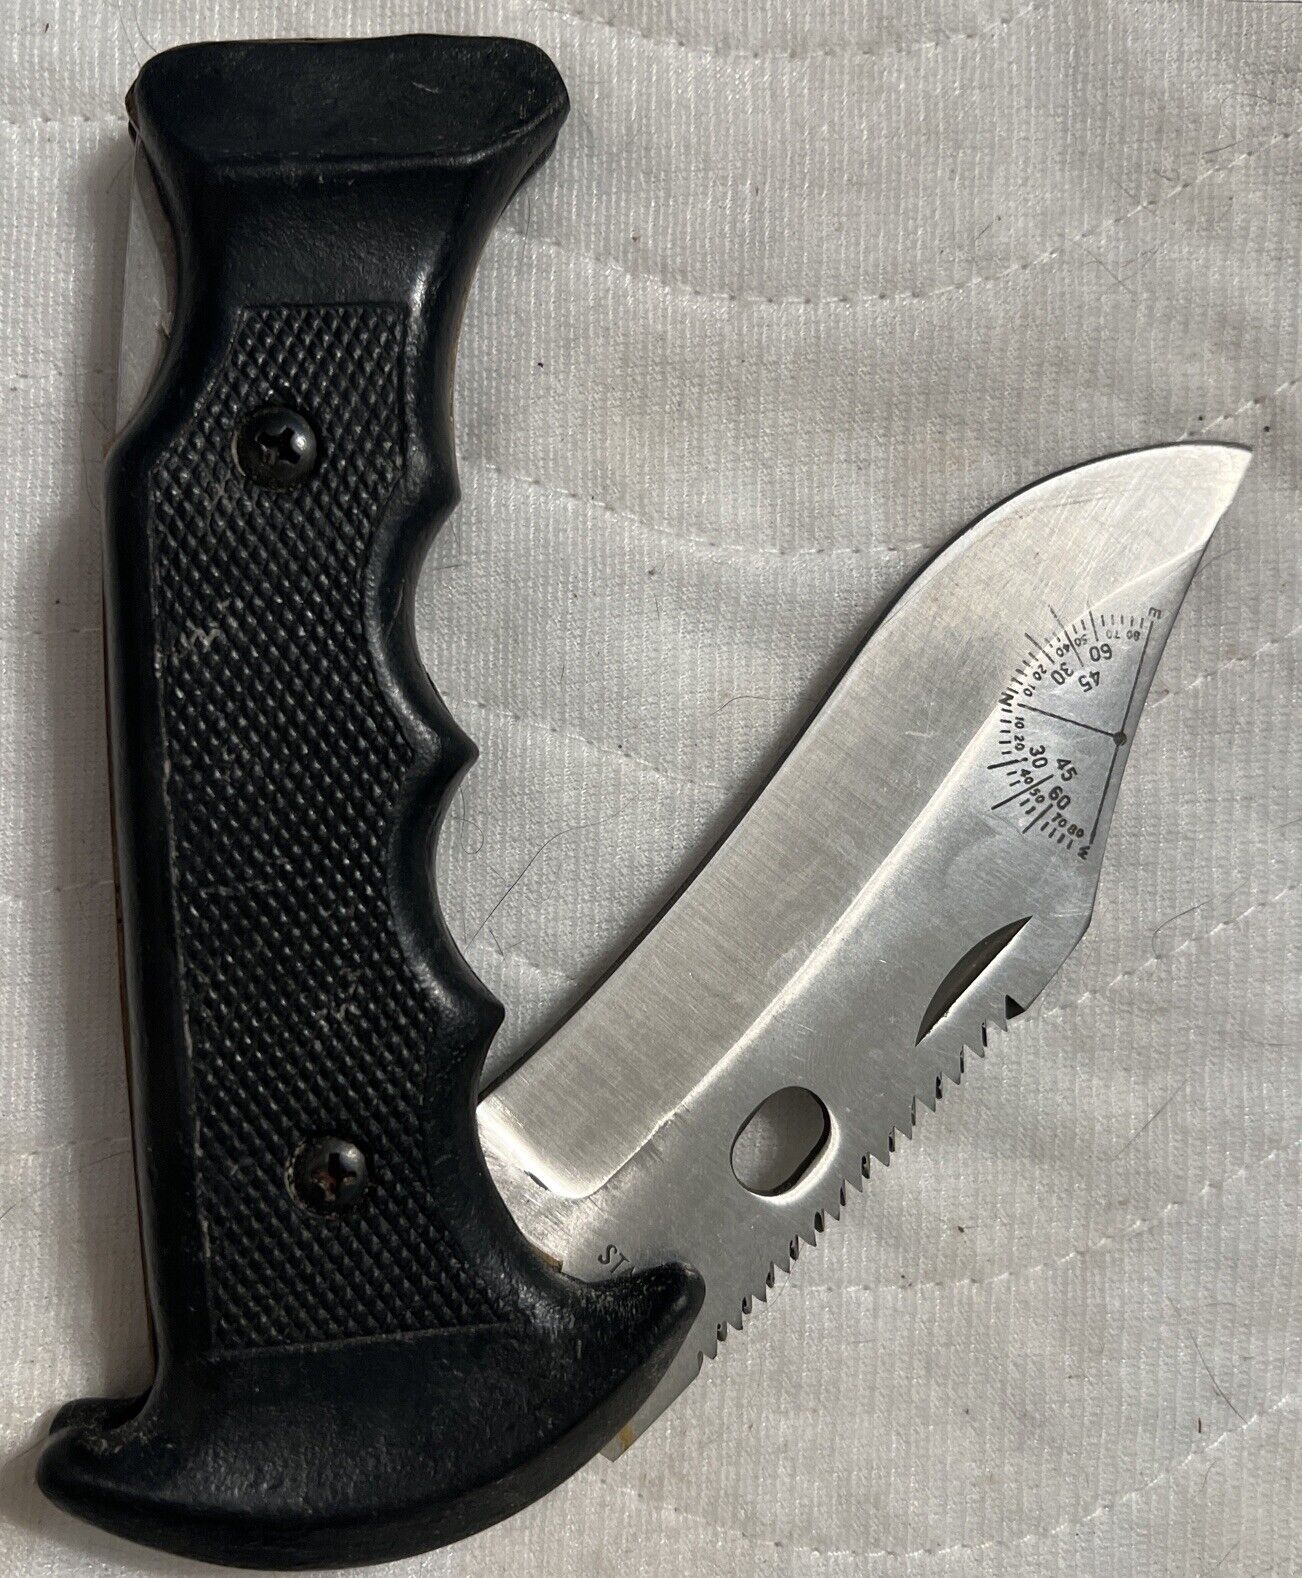 Hunting Knife Stainless Steal. Collapses Like A Pocket Knife.